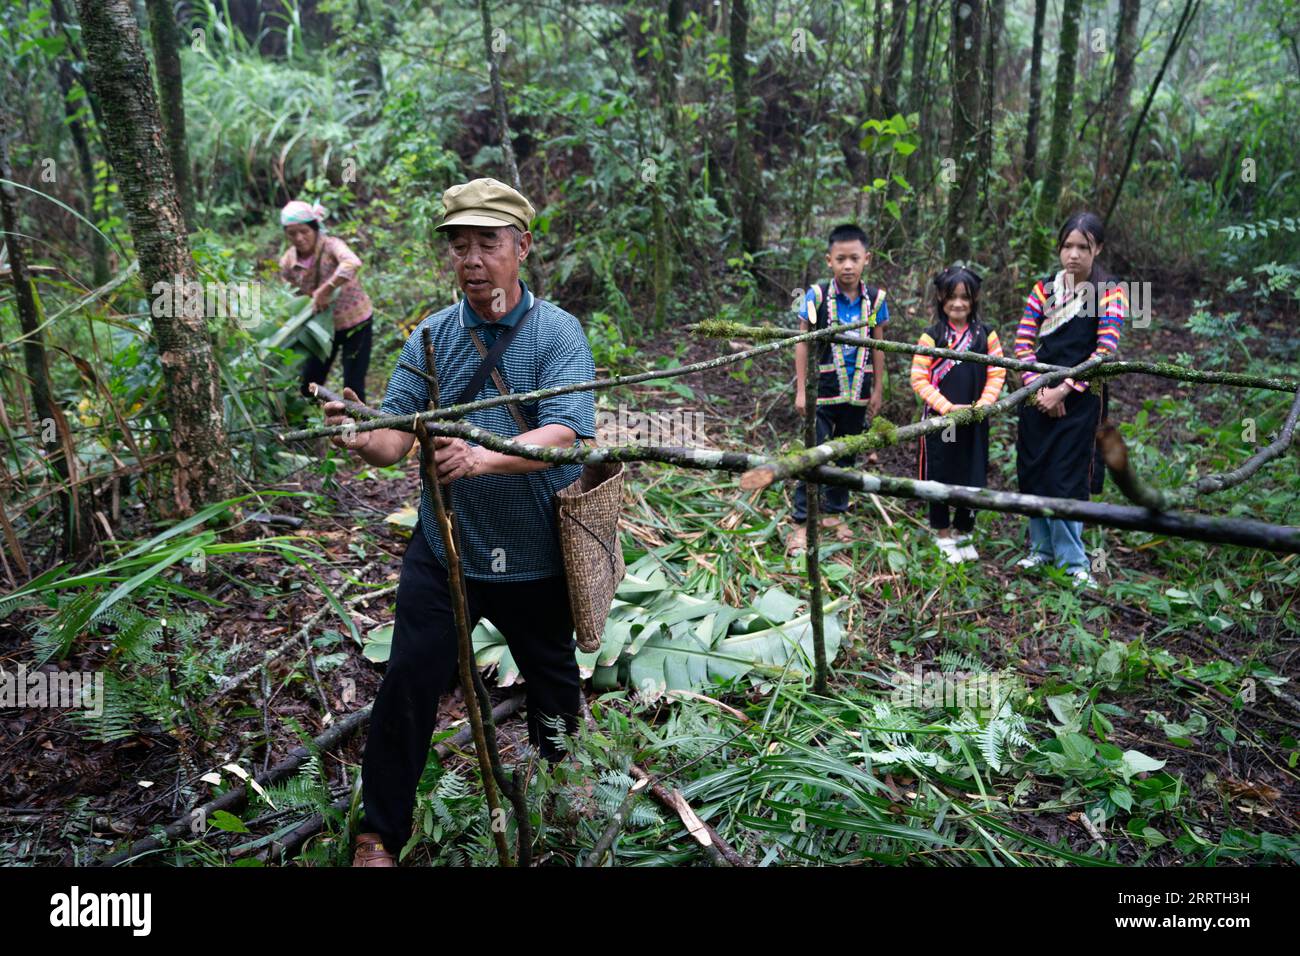 230726 -- JINPING, July 26, 2023 -- Zhang Puzhong 2nd L and his wife Wang Suying 1st L build a shed with banana leaves as their grandchildren look on in the forest near Xiaxinzhai Village, Zhemi Township, Jinping County, Honghe Hani and Yi Autonomous Prefecture, southwest China s Yunnan Province, July 23, 2023. After days of thinking, Zhang Puzhong decided to do something instructive to his grandchildren: bring them back to the forest he used to live as a child more than 60 years ago. This is very important. I know how happy I am today because I never forget how bitter my life was in the past, Stock Photo